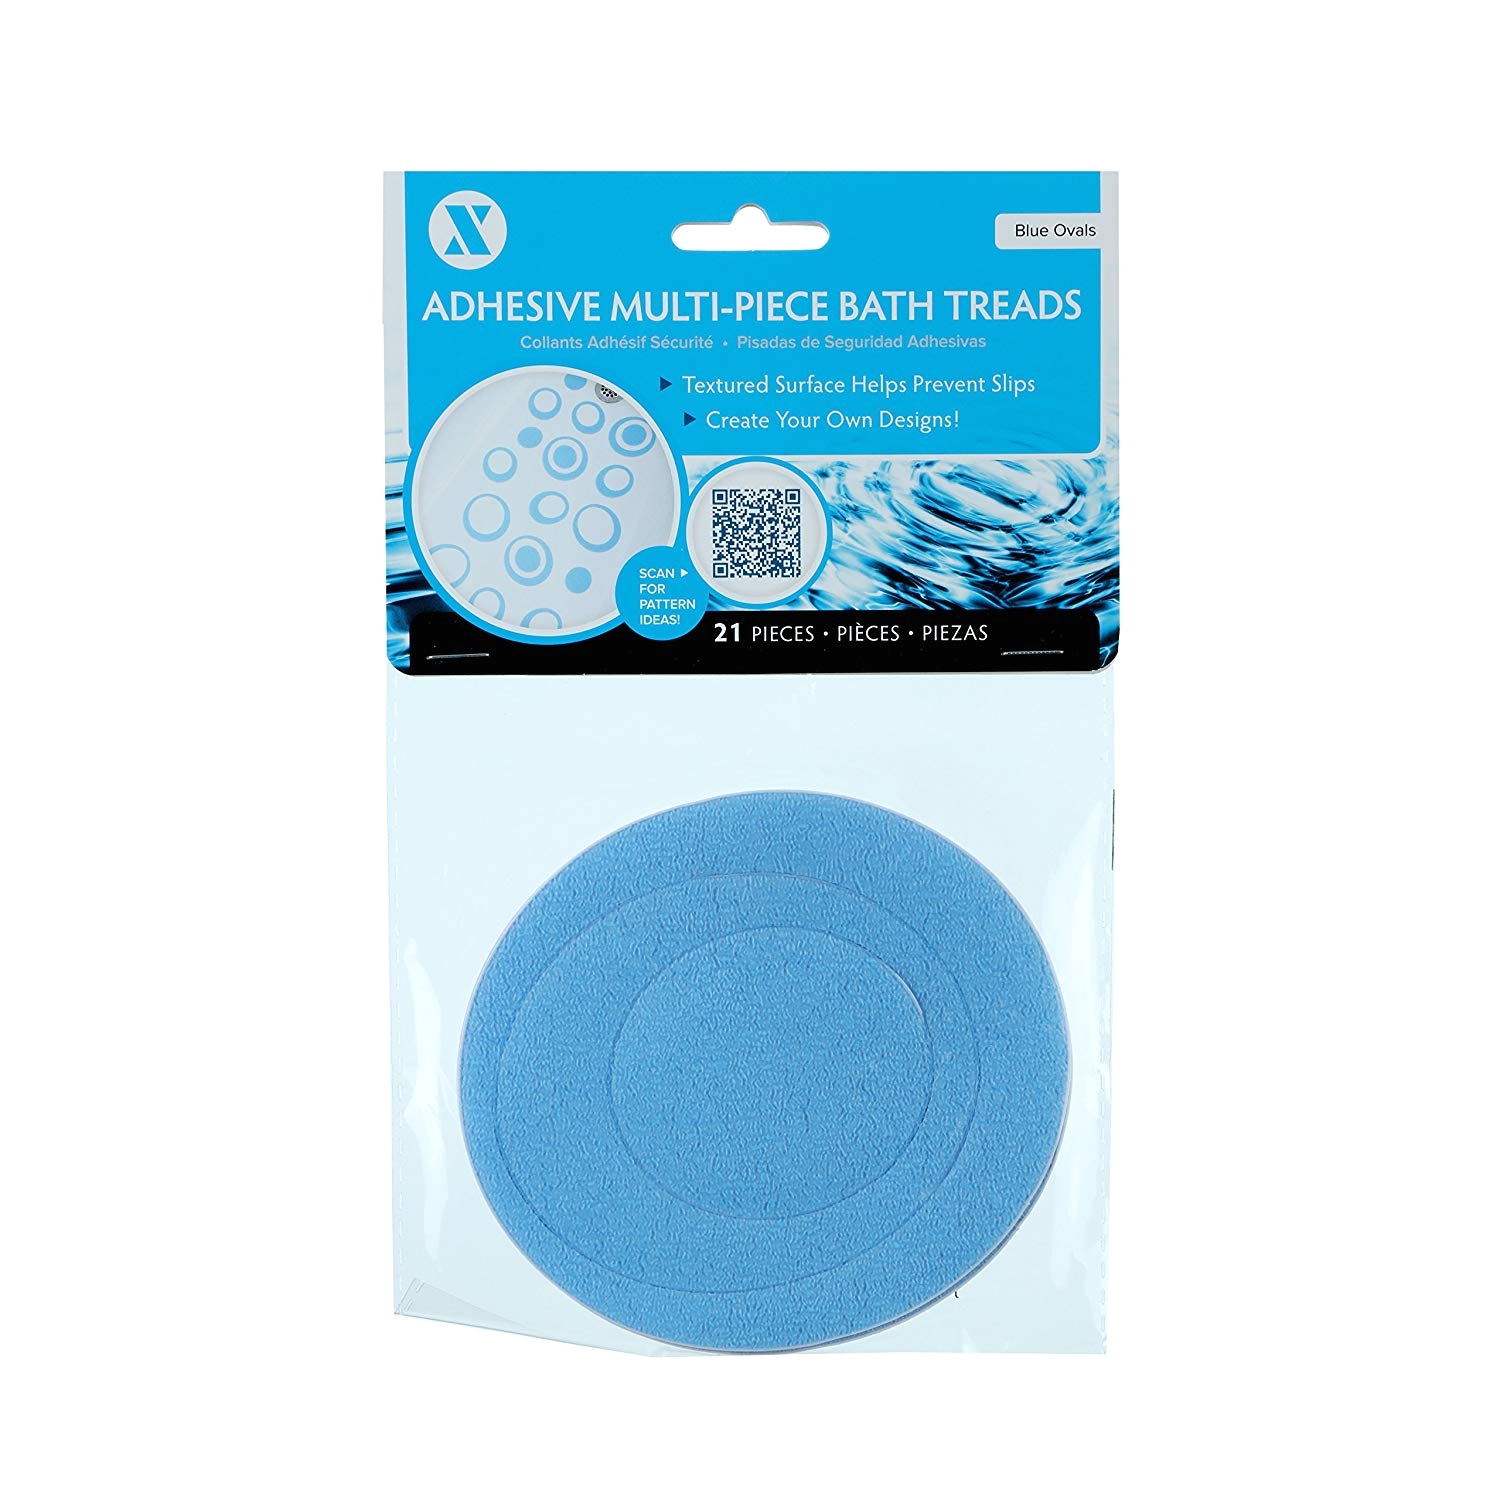 amazon com slipx solutions adhesive oval safety treads add non slip traction to tubs showers other slippery spots design your own pattern